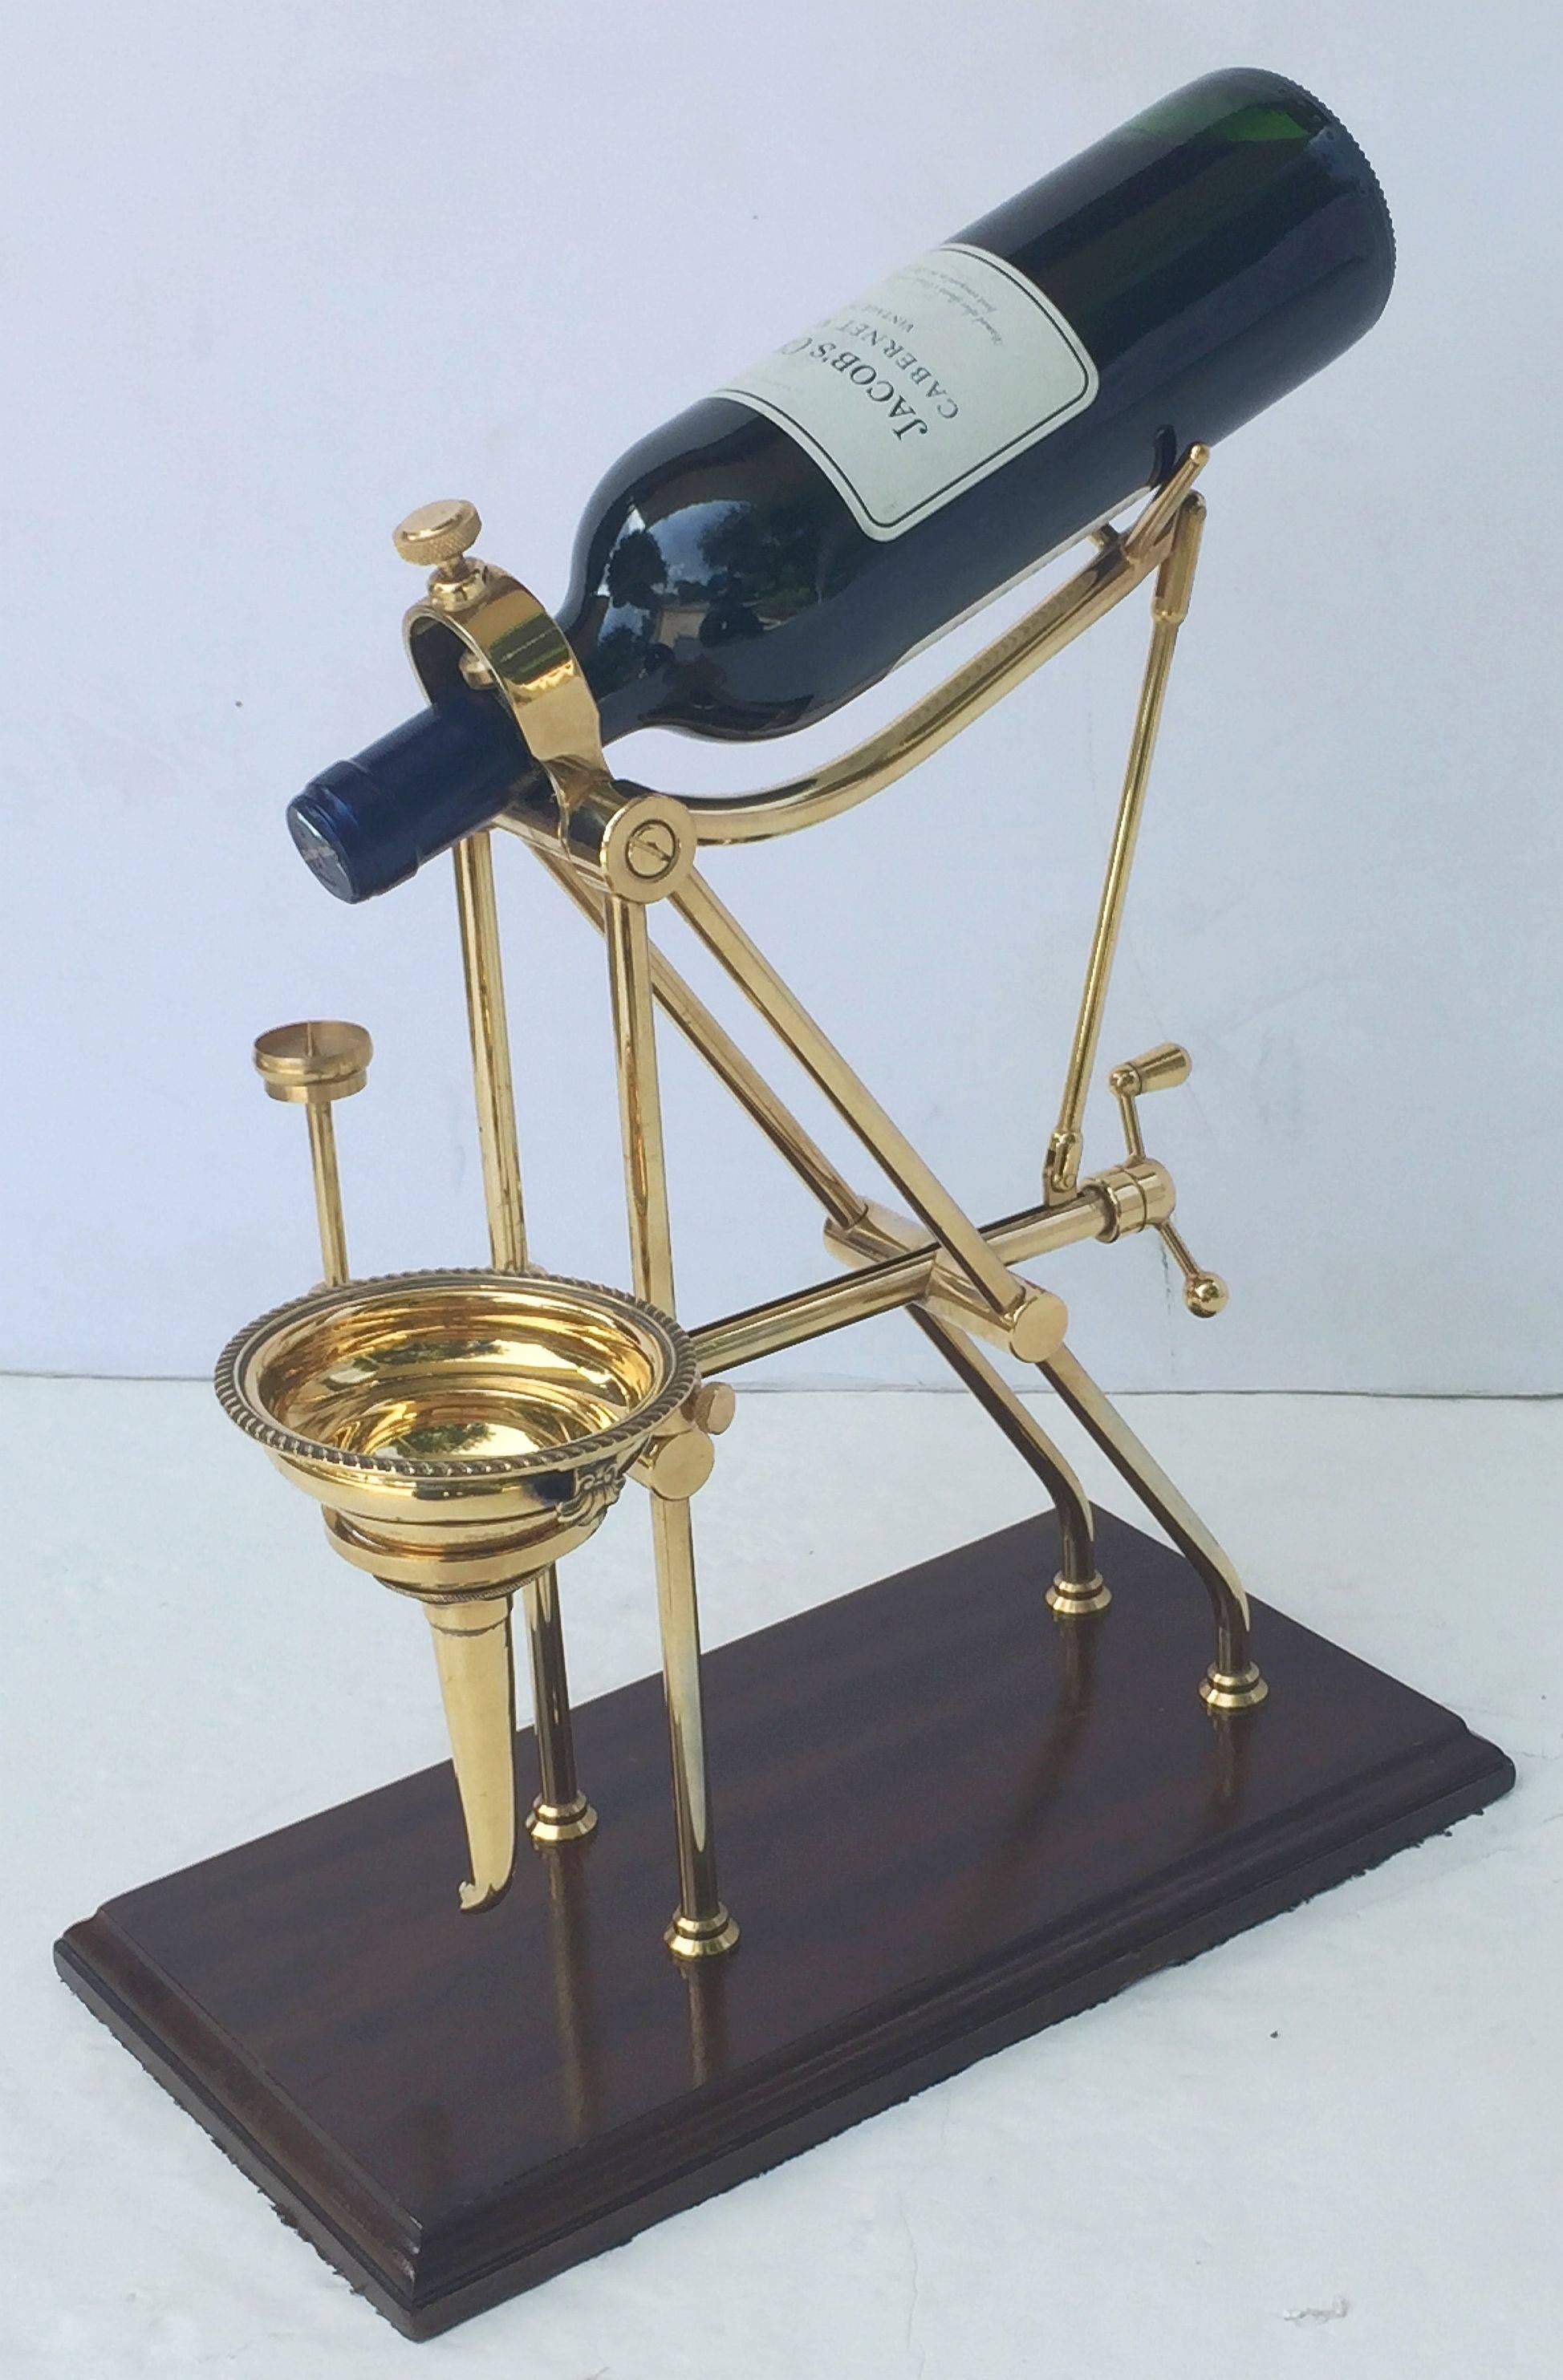 A handsome English vintage port wine decanting cradle which allows for precise decanting of your favorite aged wines. The brass cradle has an adjustable neck which accommodates a variety of bottle lengths and the precisely engineered hand crank